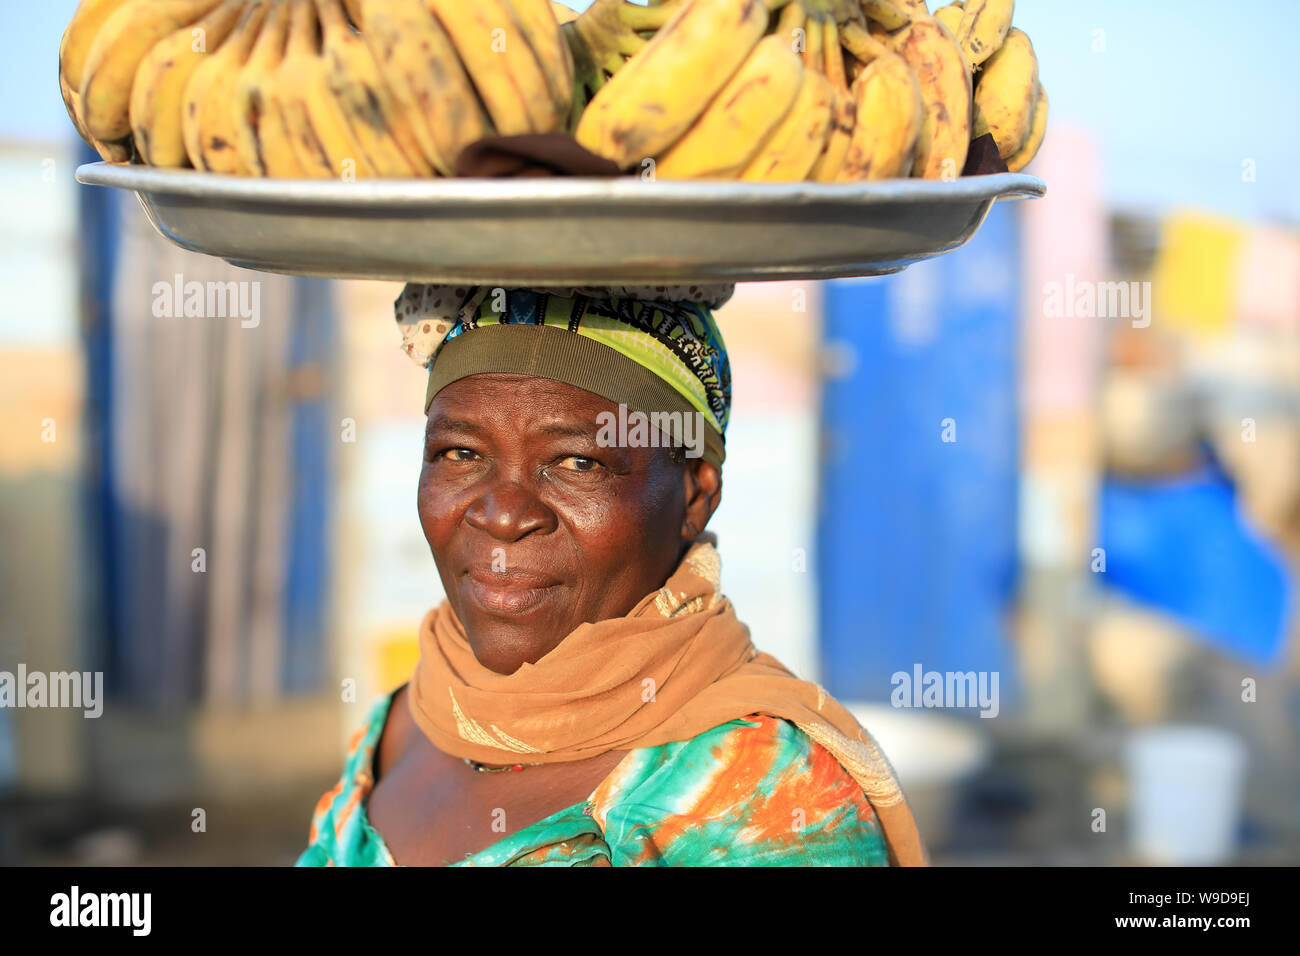 Market woman carries a plate with bananas on her head in Accra, Ghana Stock Photo